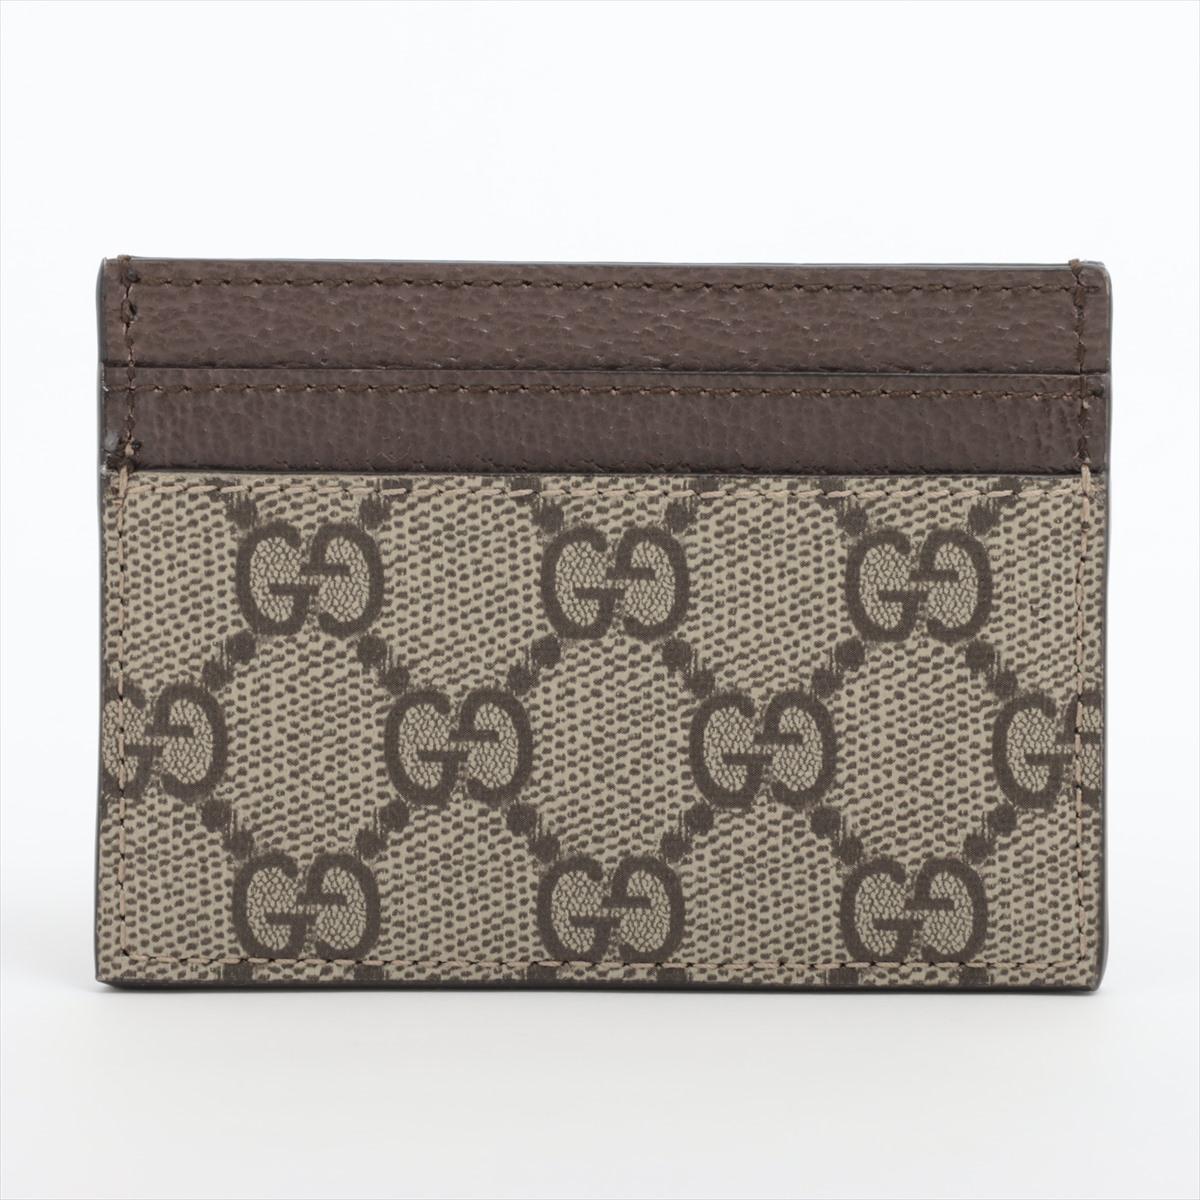 Gucci GG Supreme Card Case Brown In Good Condition For Sale In Indianapolis, IN